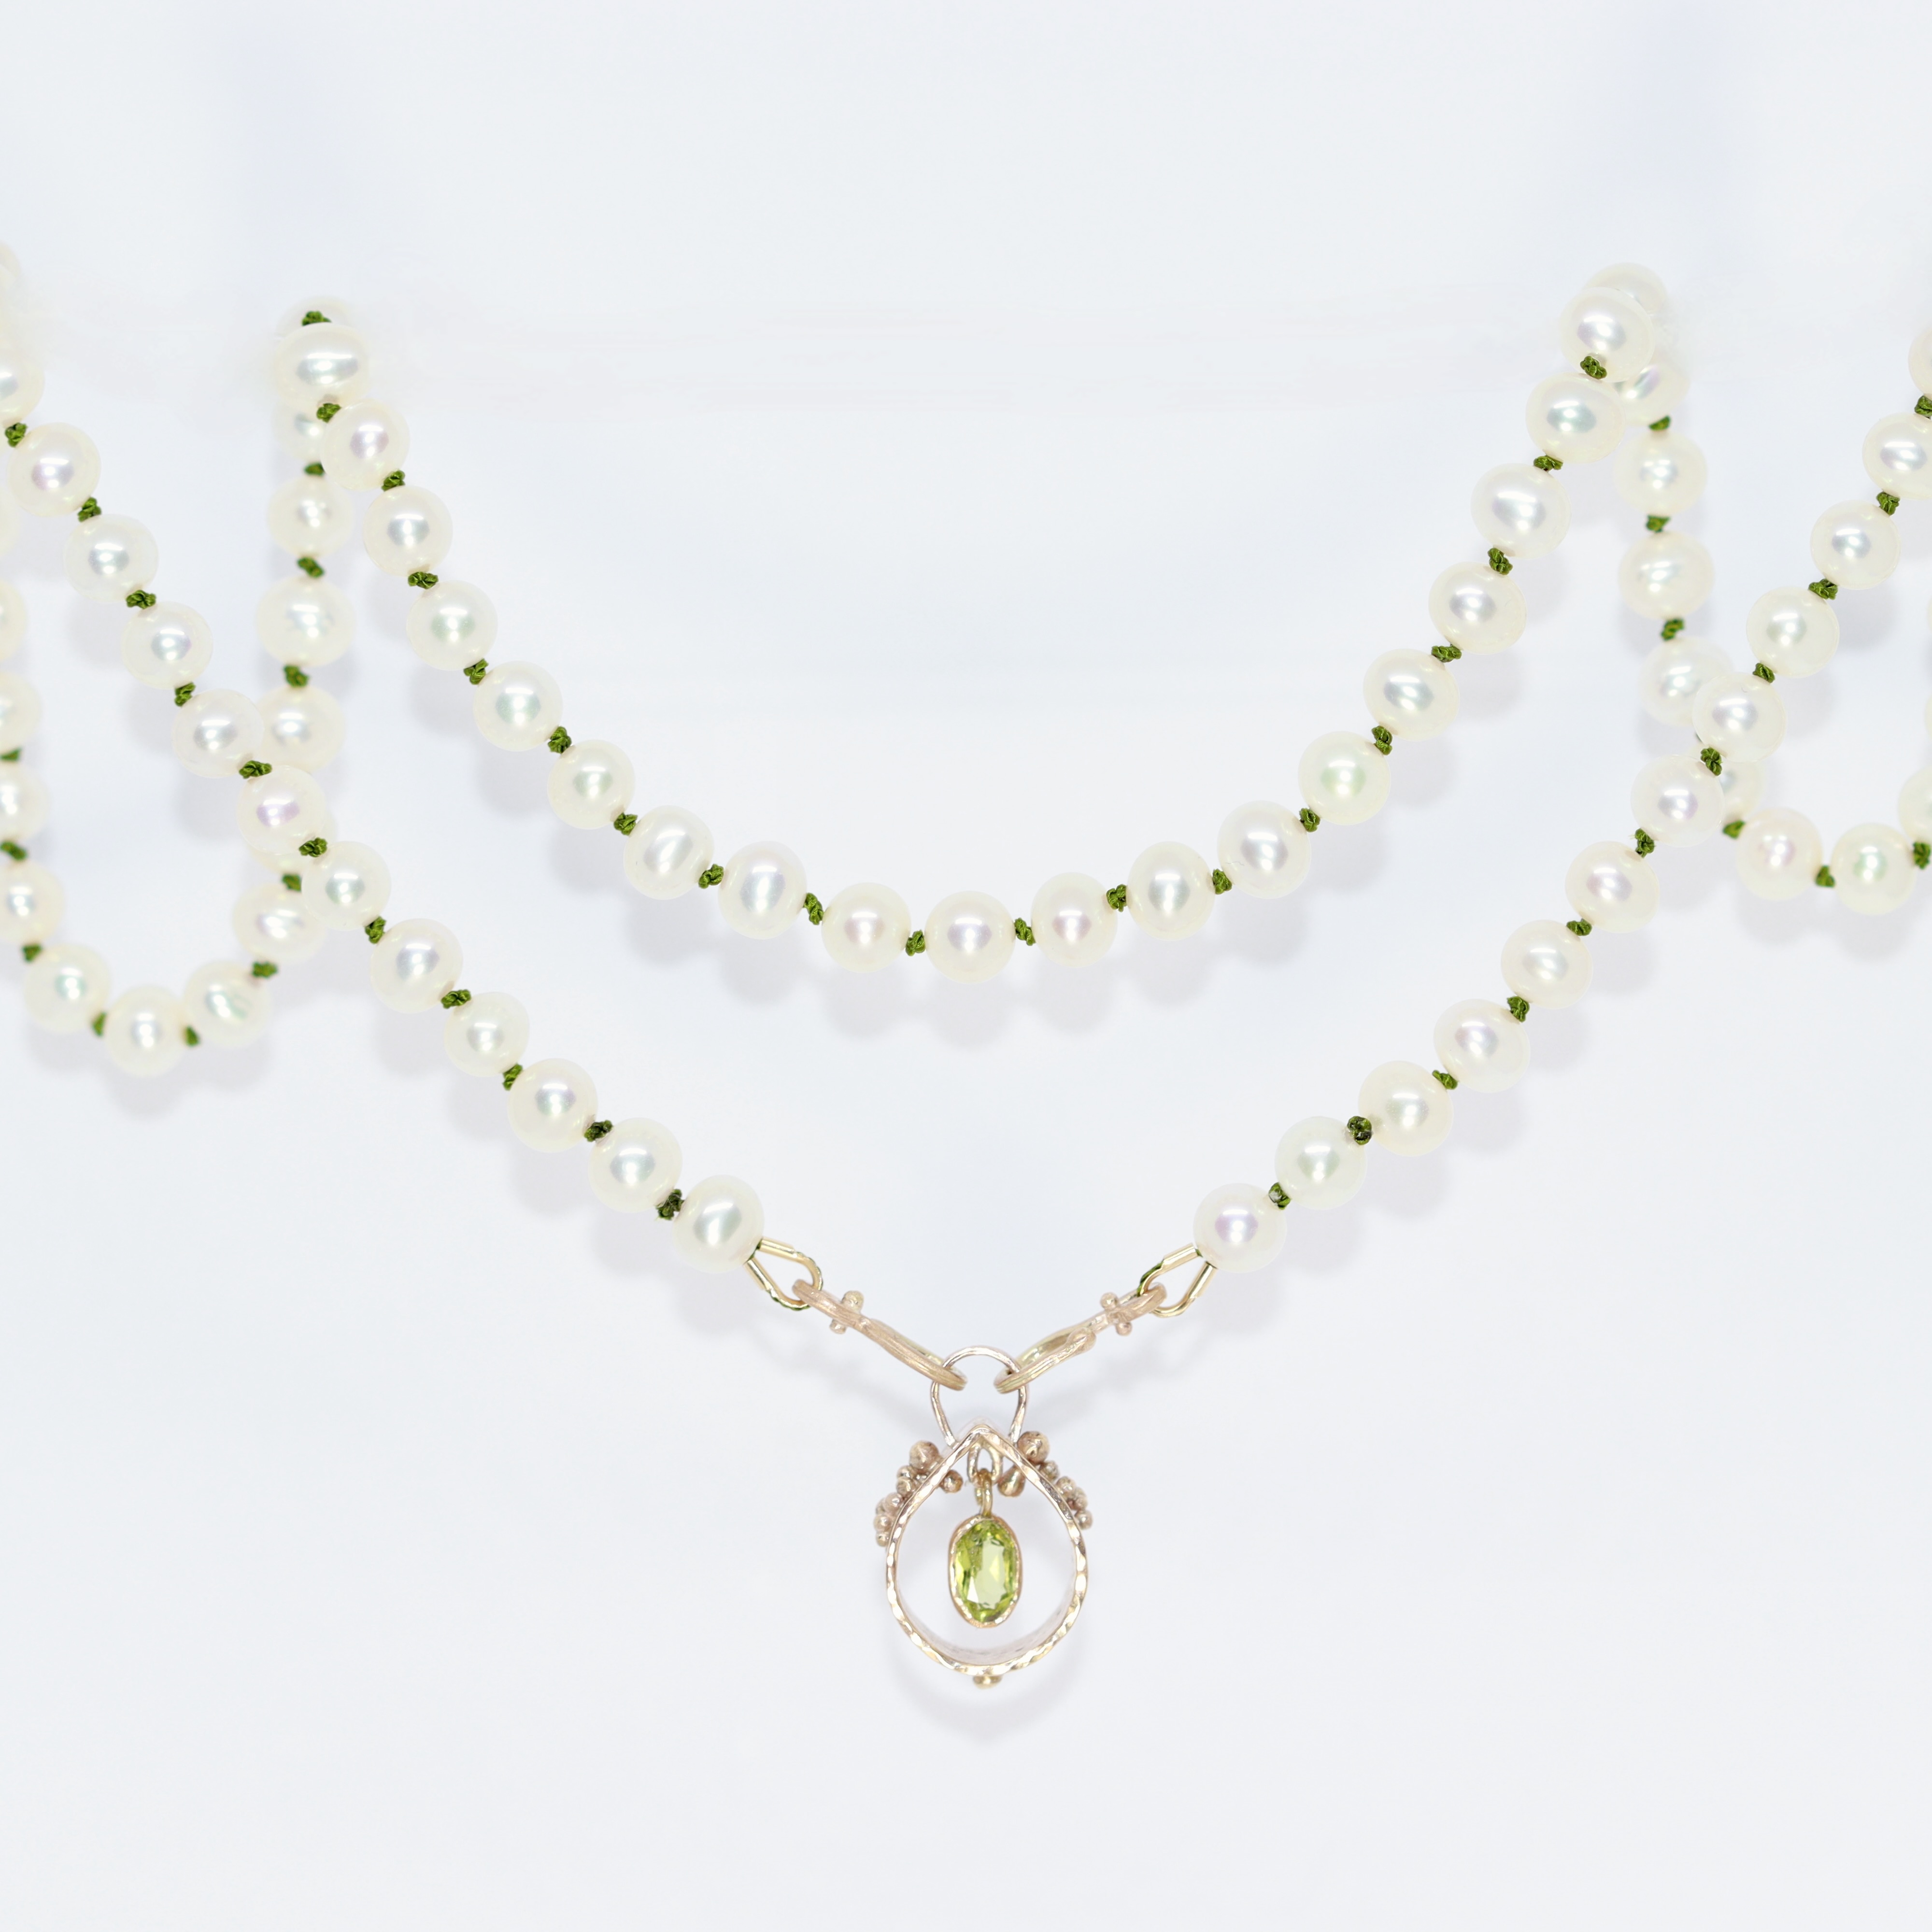 String of Pearls, Peridot and Gold Necklace